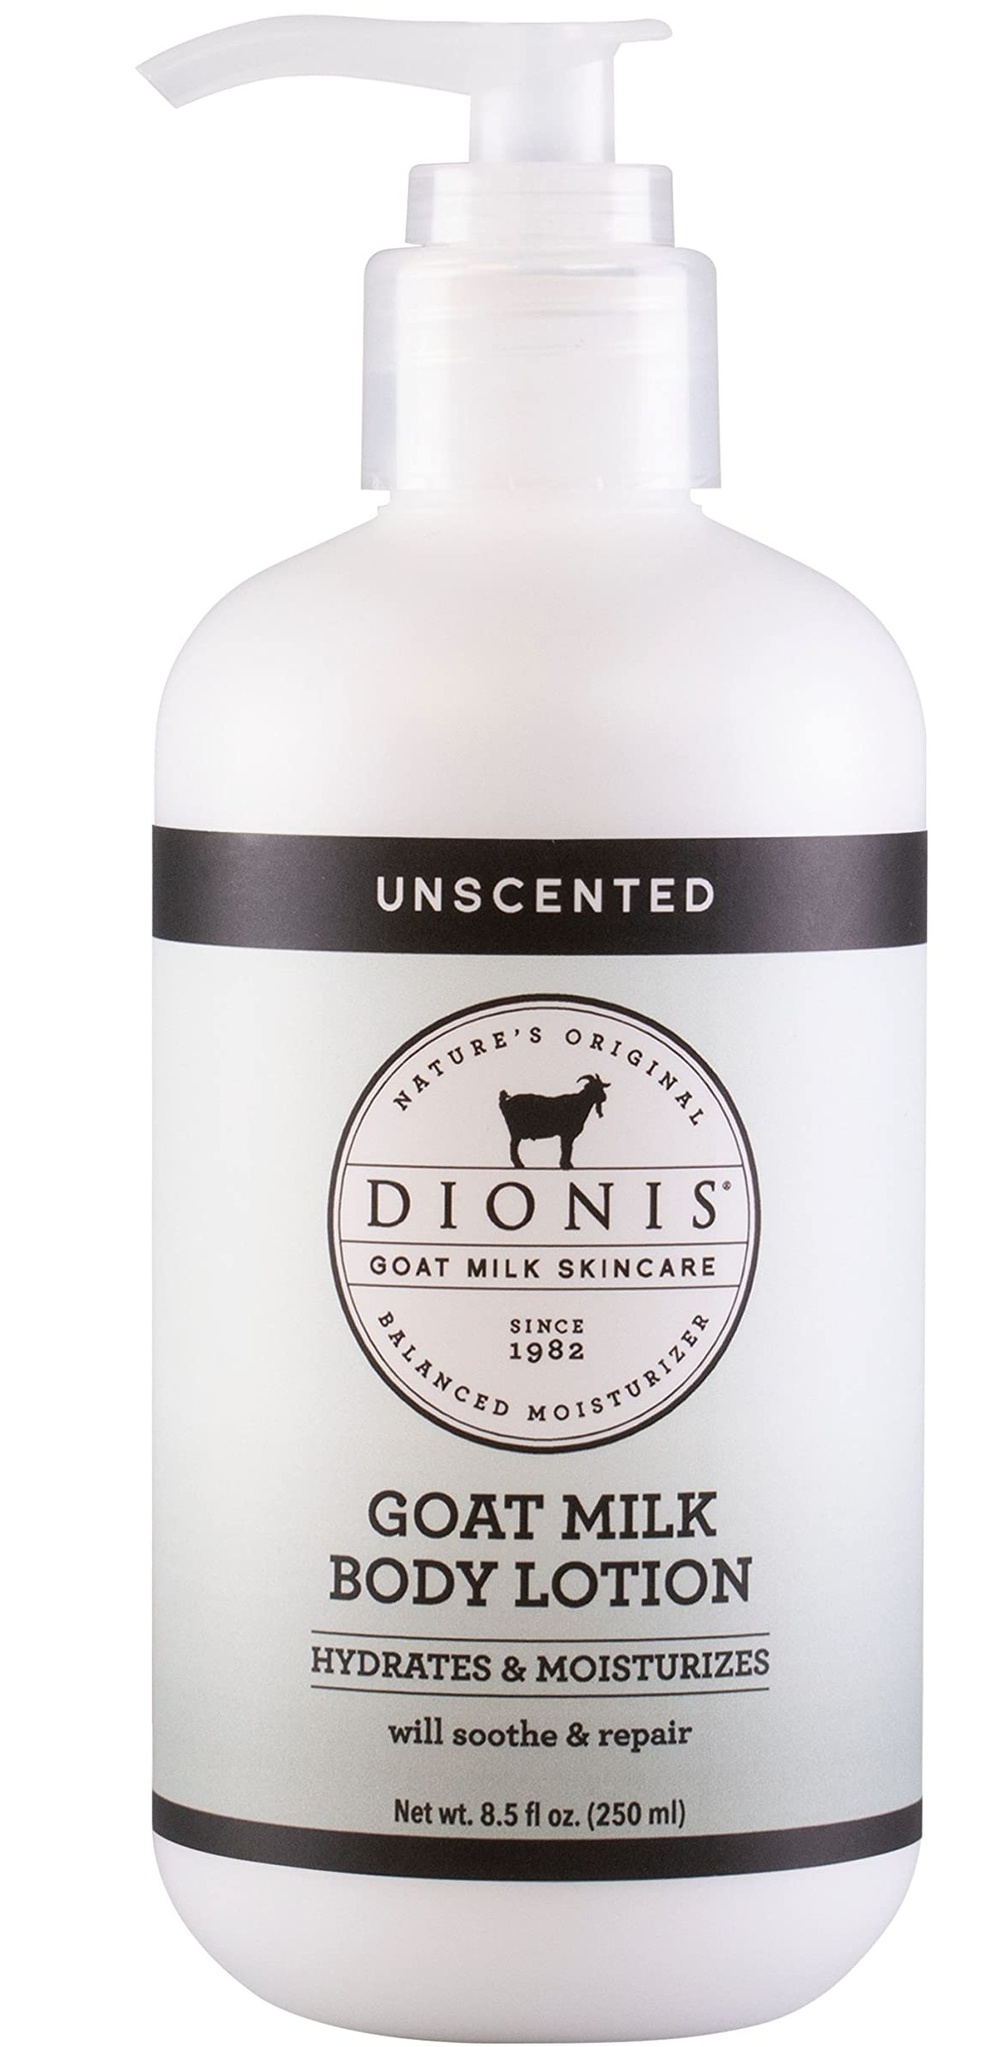 Dionis Unscented Goat Milk Body Lotion